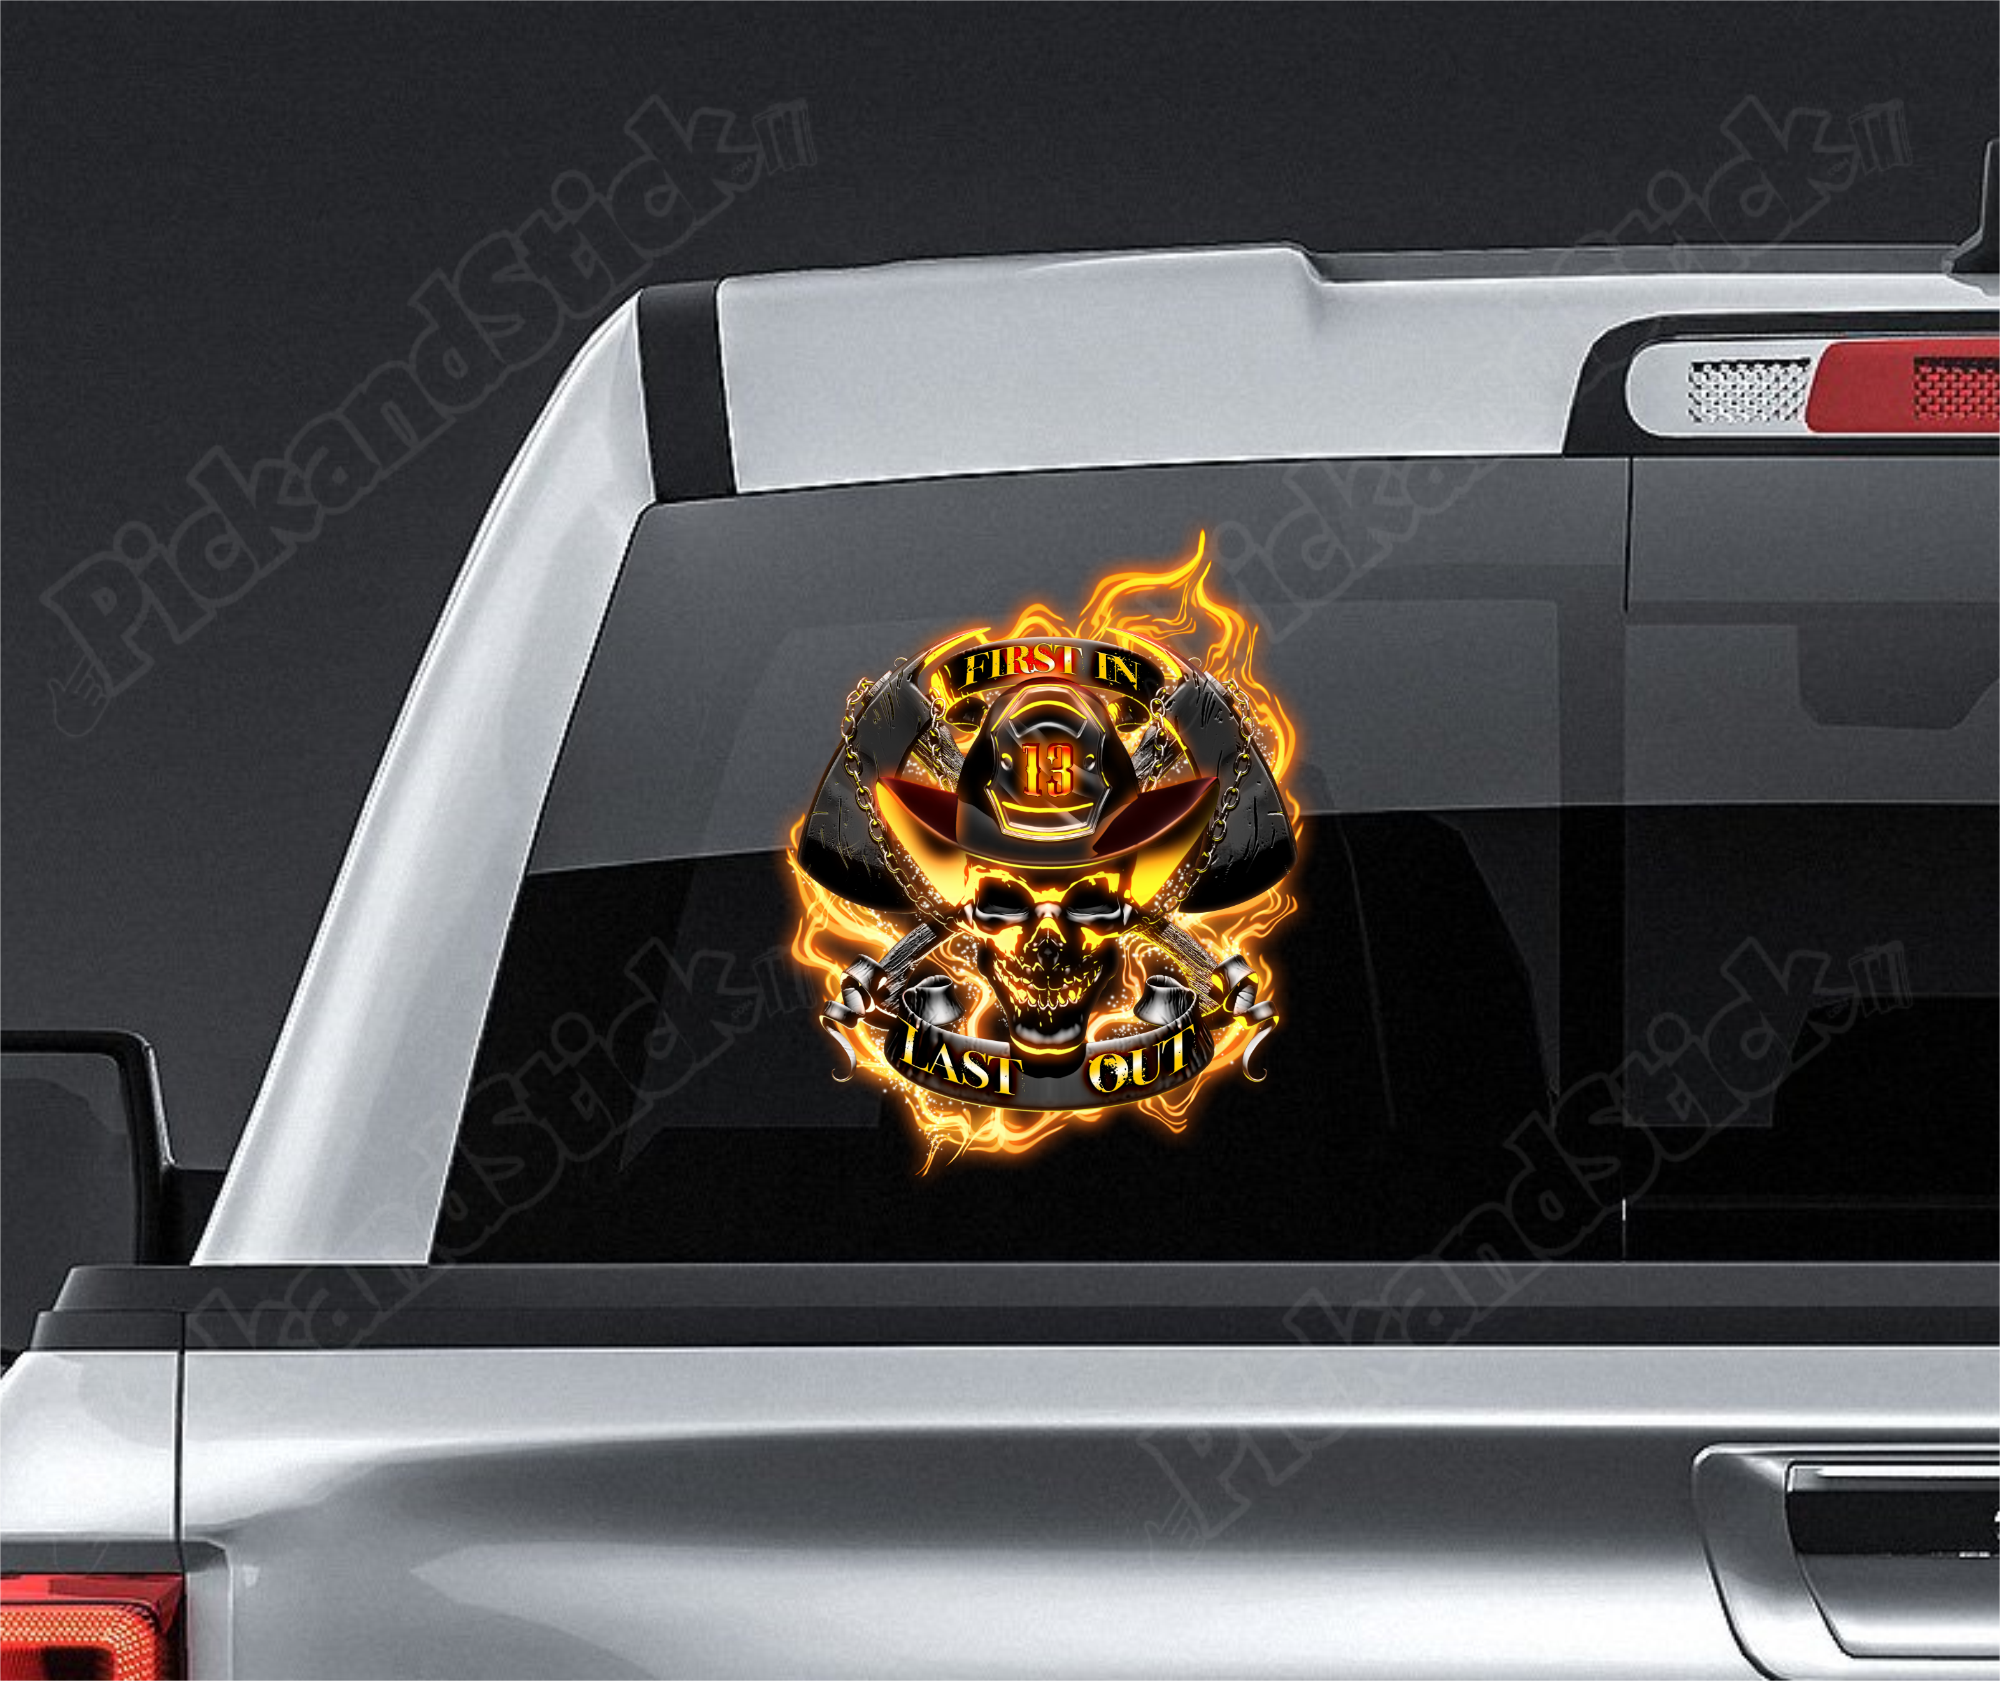 Fire Fighter - First In Last Out - Decal - PickandStickcom